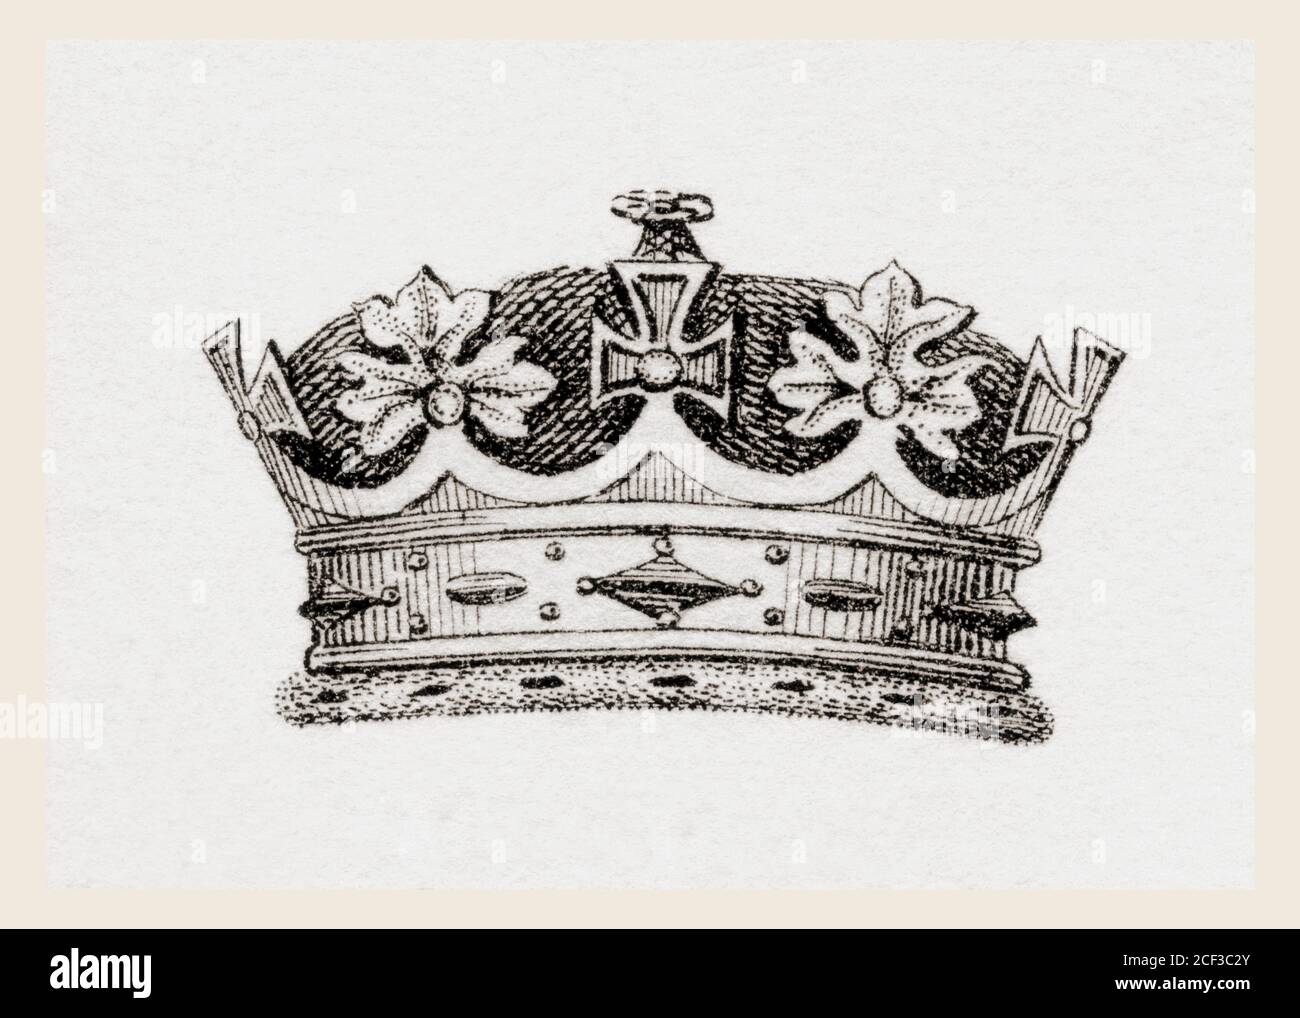 Crown worn by the grandchildren of the English monarch.  From The National Encyclopaedia: A Dictionary of Universal Knowledge, published c.1890 Stock Photo